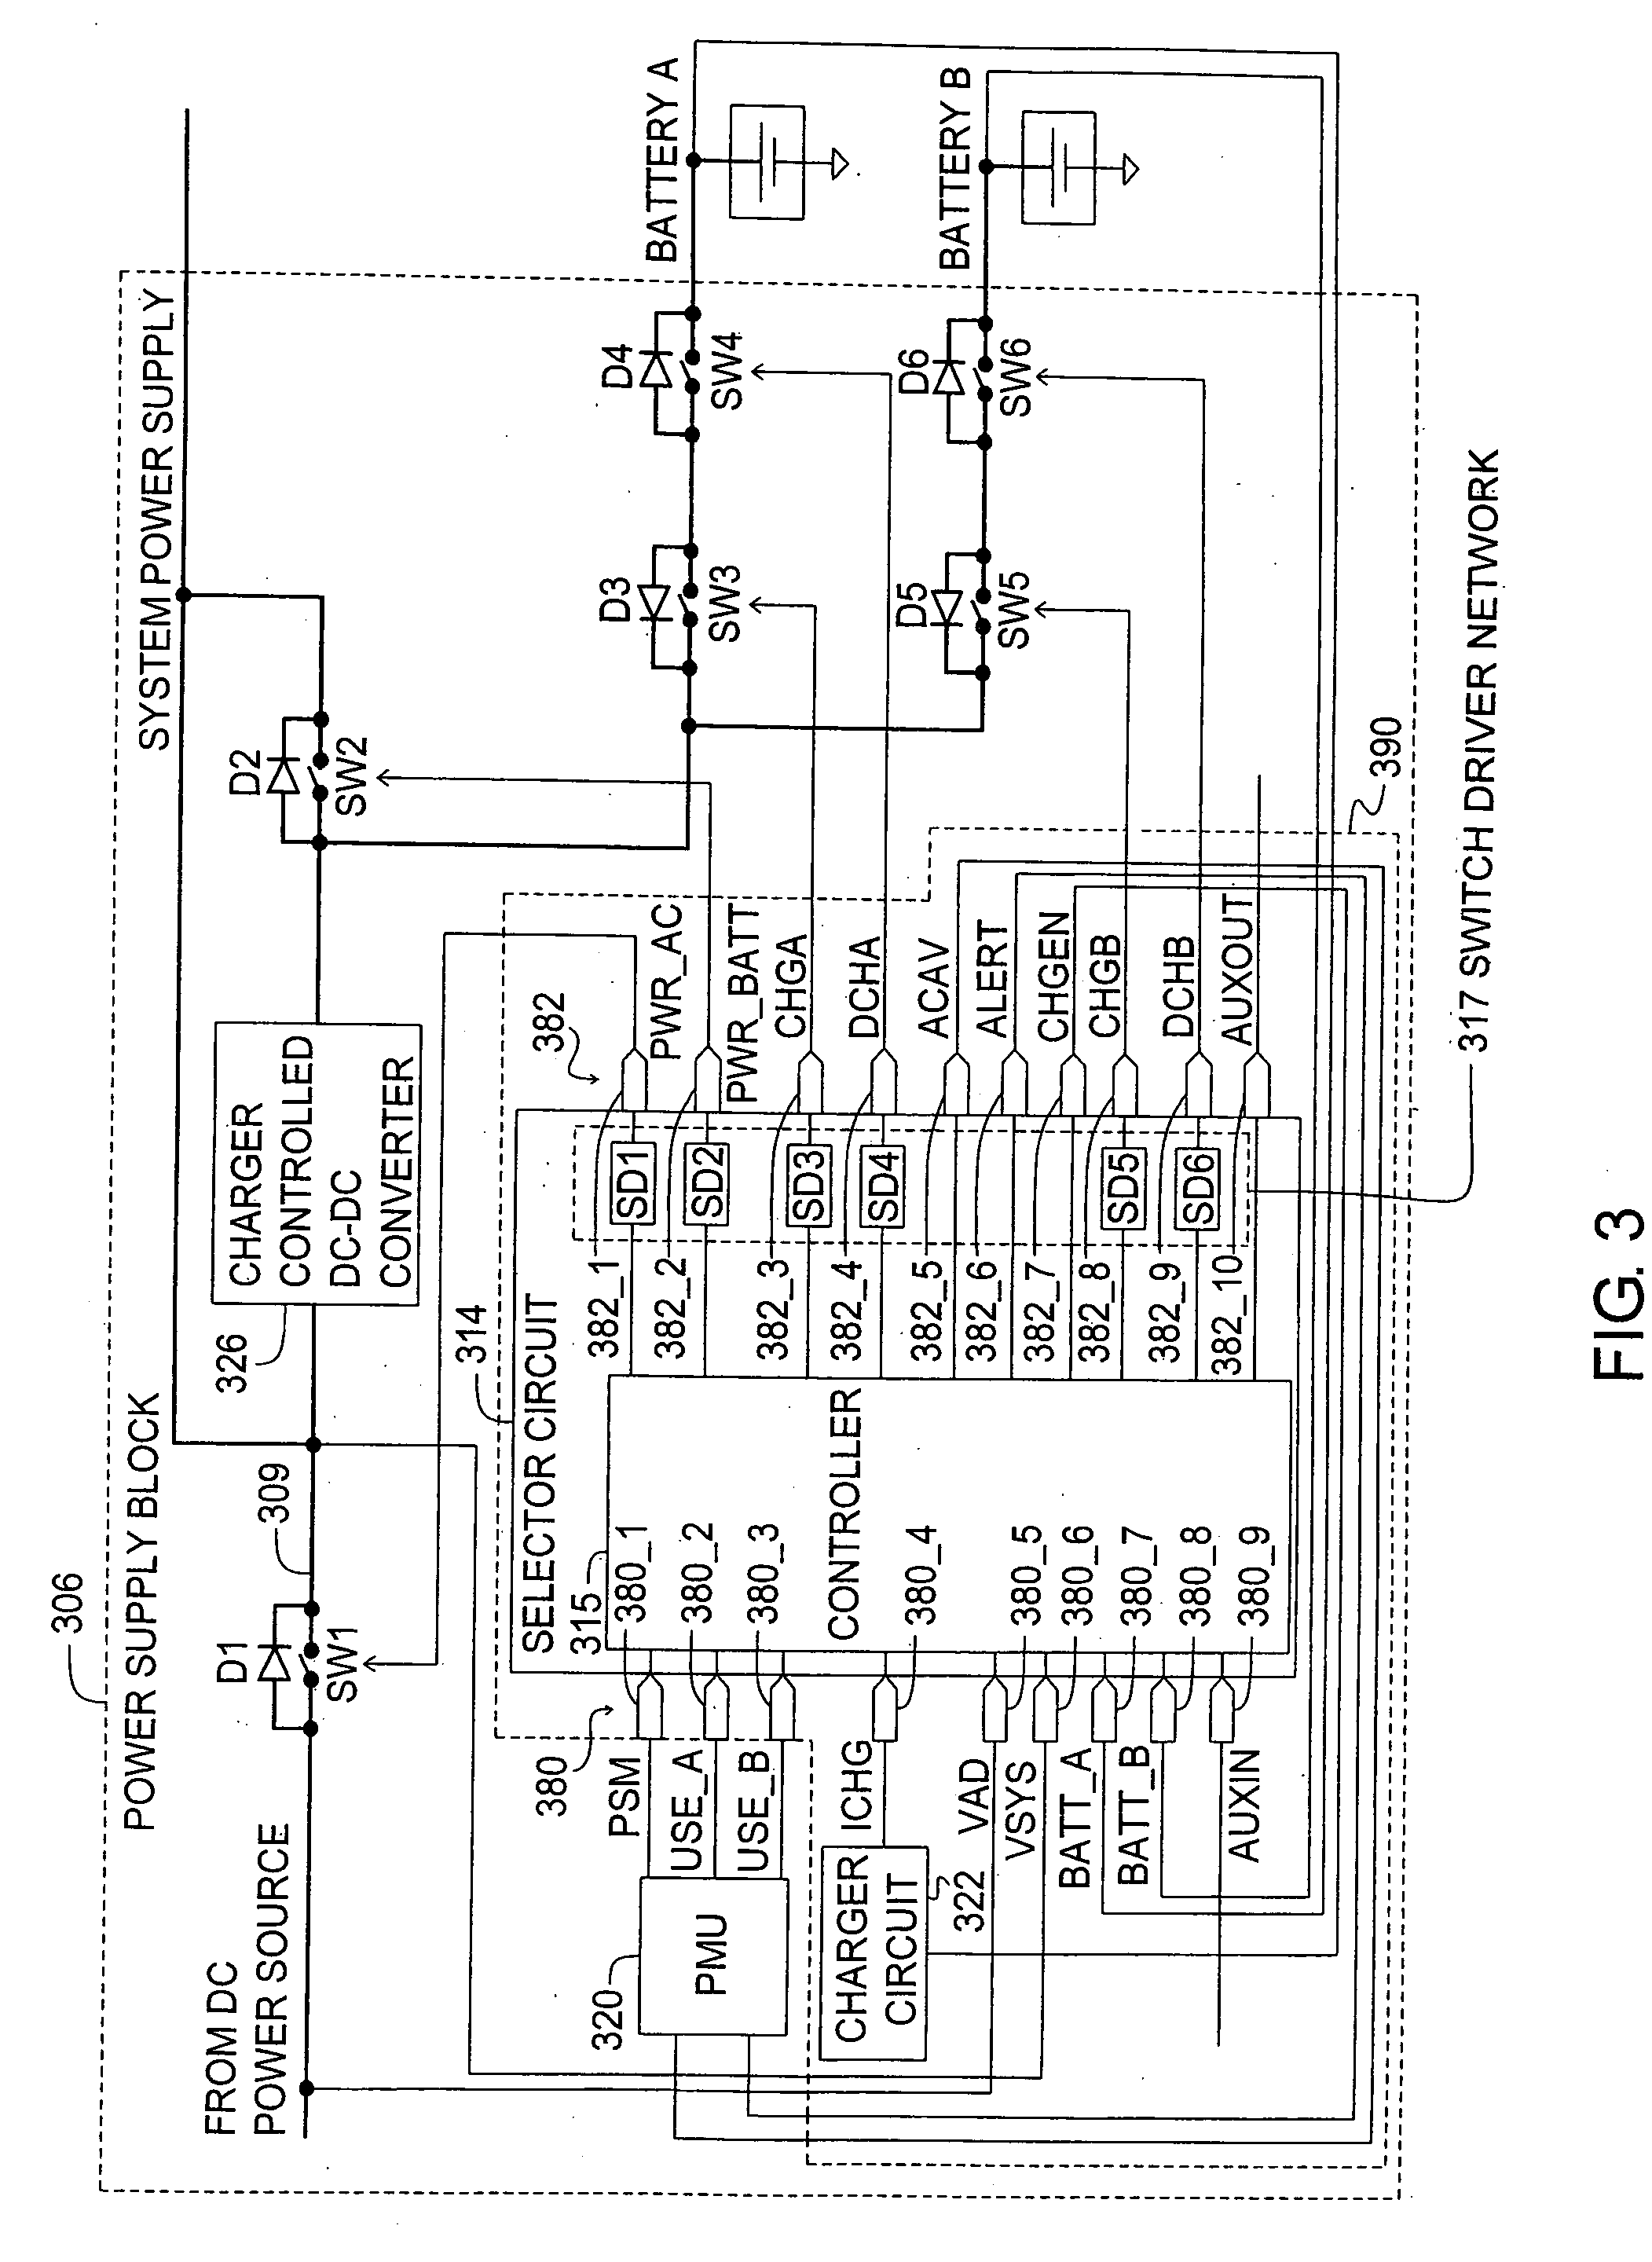 Selector circuit for power management in multiple battery systems